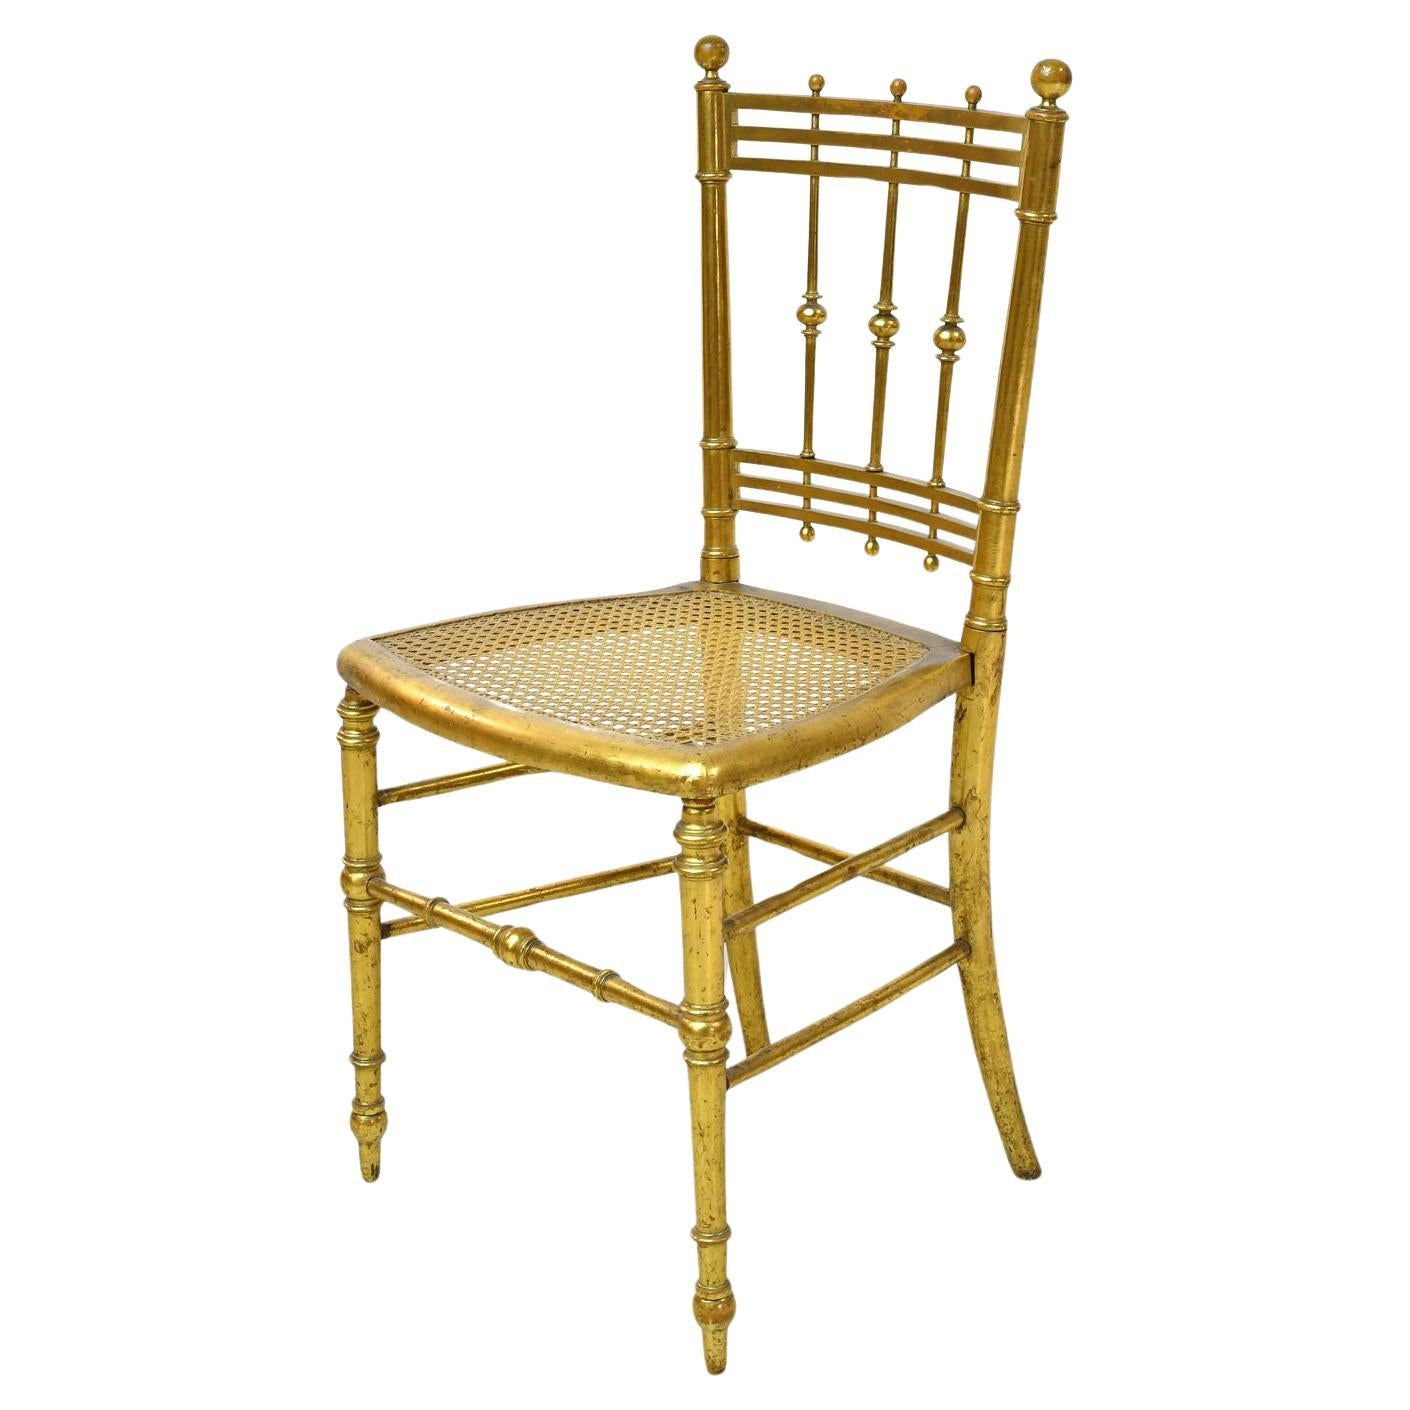 Early 20th Century French Belle Époque Chair in Gilt-Wood with Cane Seat.